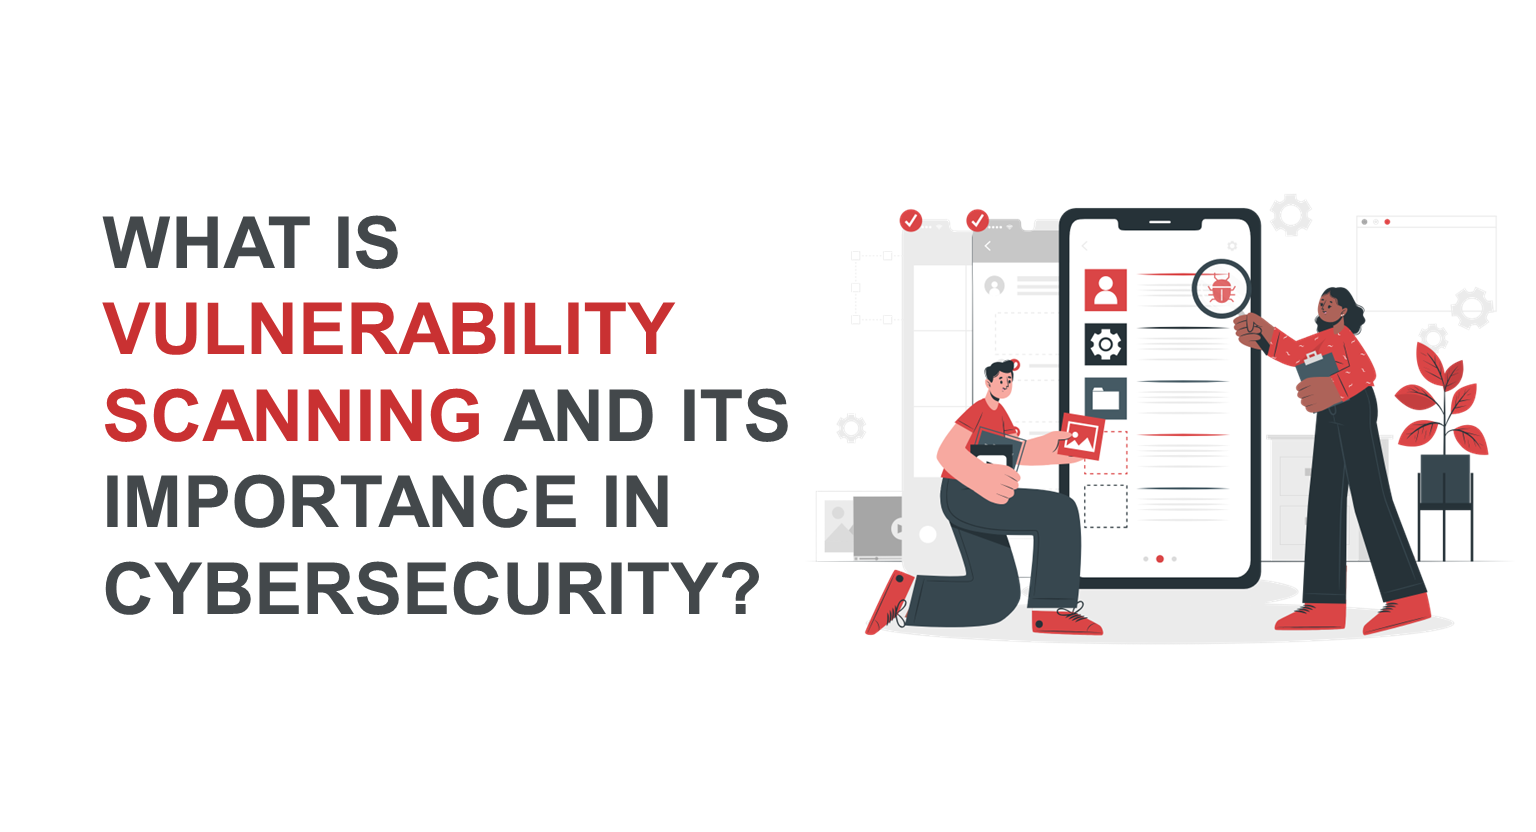 What is Vulnerability Scanning and its Importance in Cybersecurity?